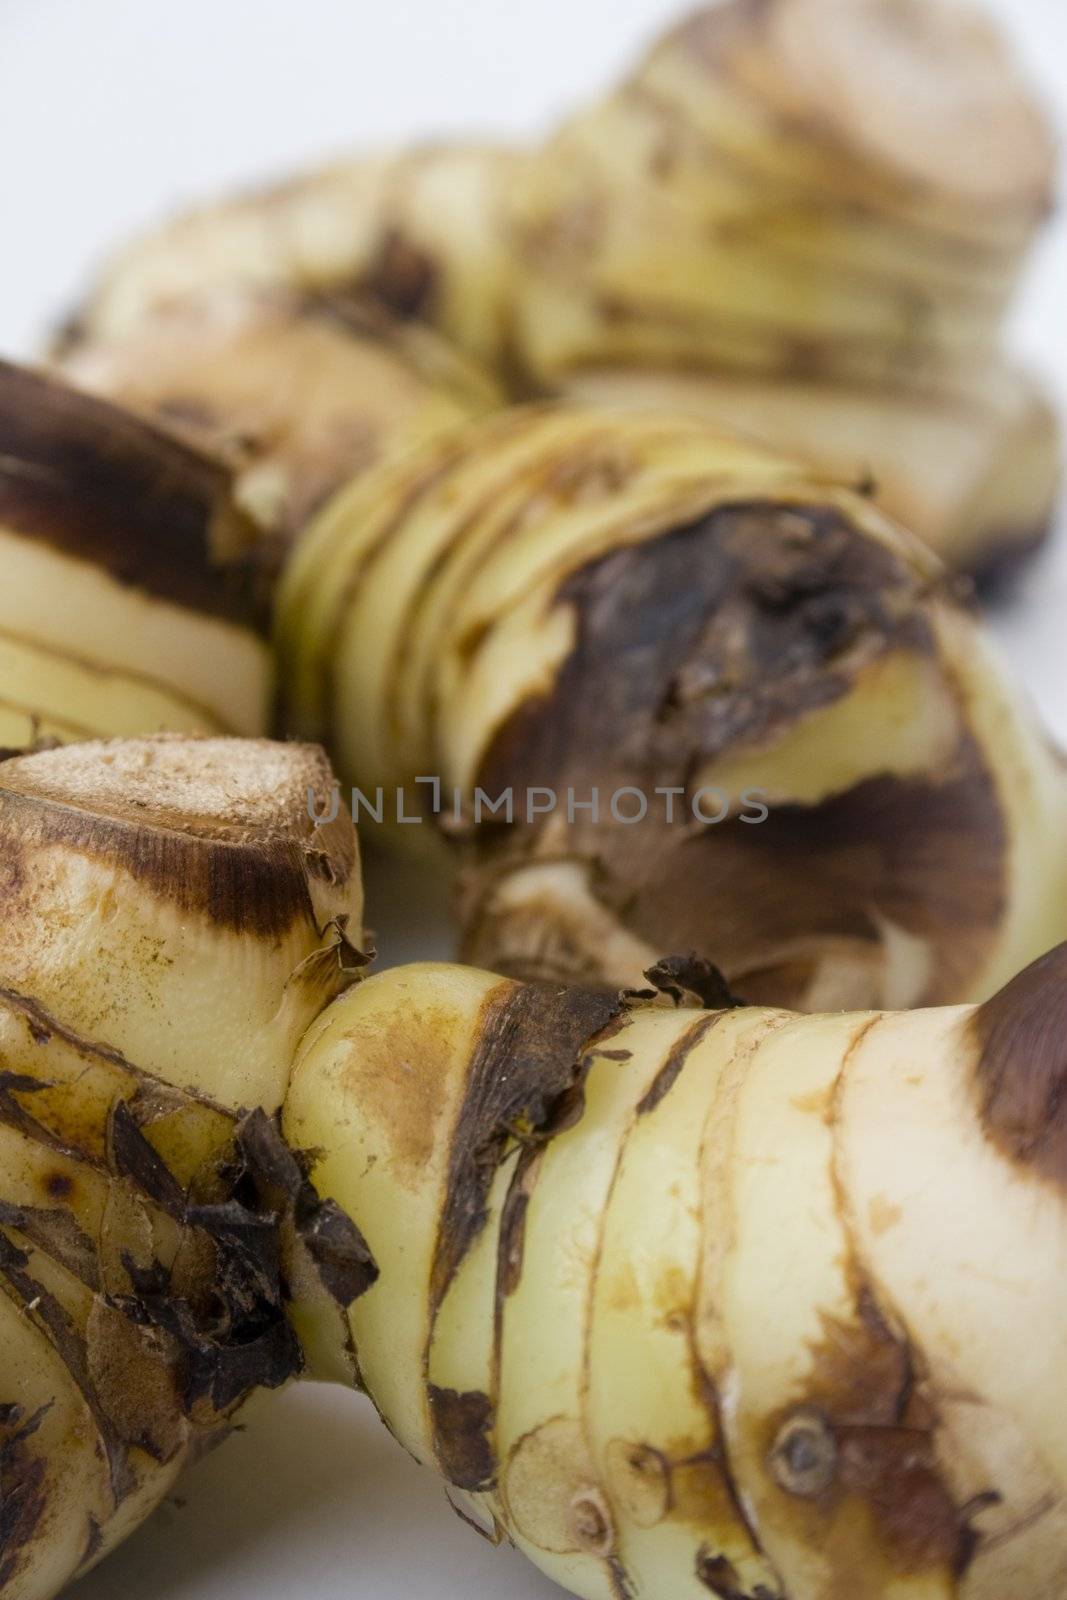 Galangal root by timscottrom